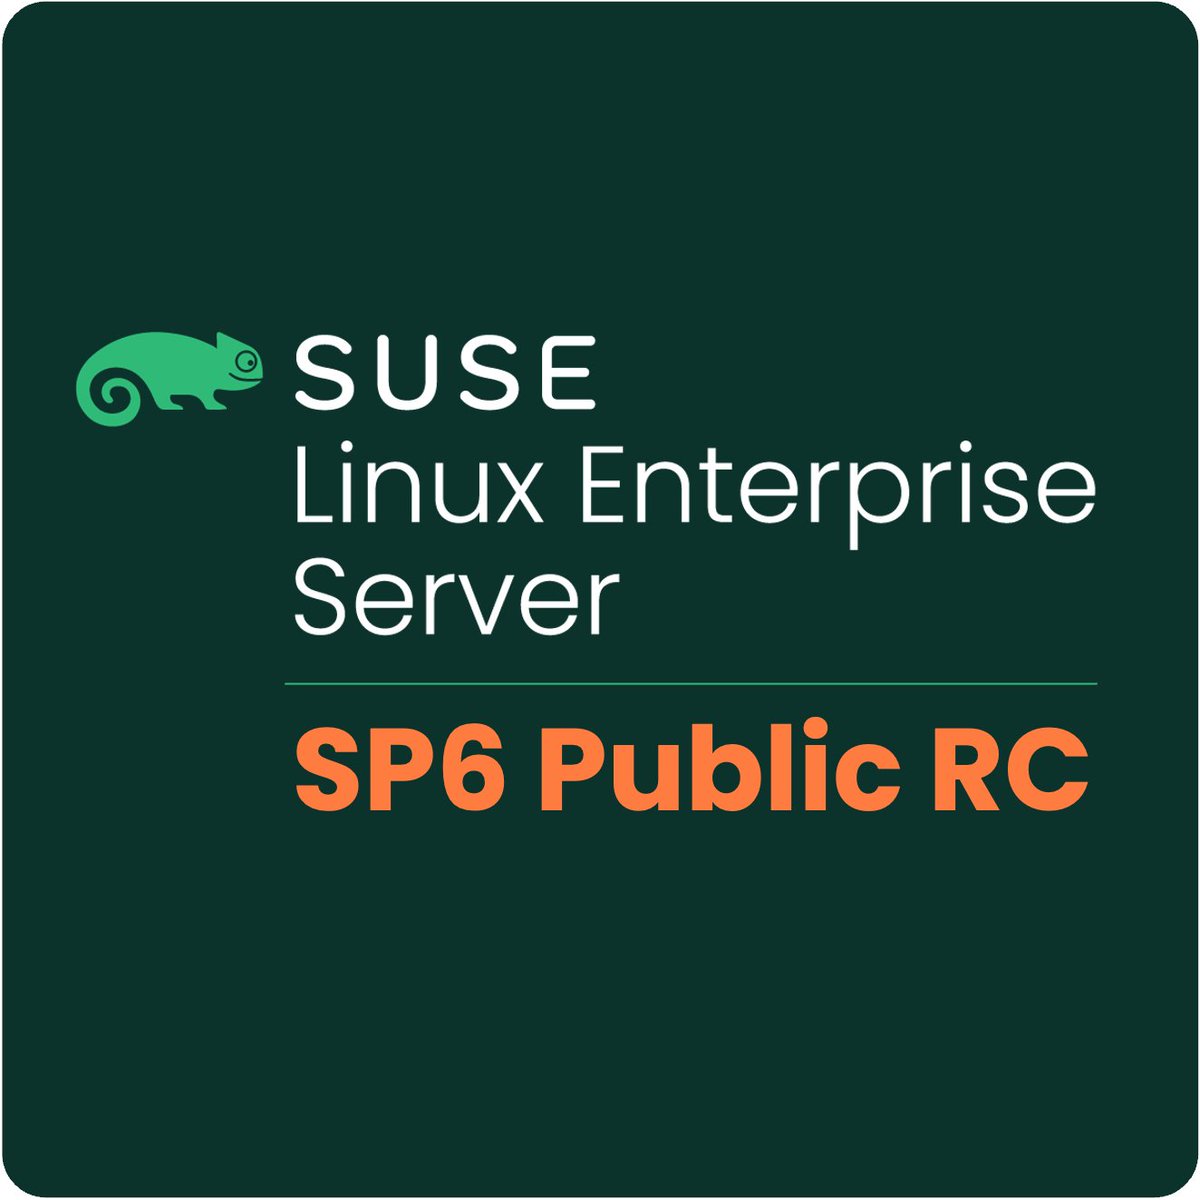 #SLES 15 SP6 Public Release Candidate is now available, representing a comprehensive refresh of @SUSE flagship suite of enterprise products and extensions, including those for #SAP, #HighAvailability, #HighPerformanceComputing, and #Linux-based desktops.👉okt.to/SmIzWh